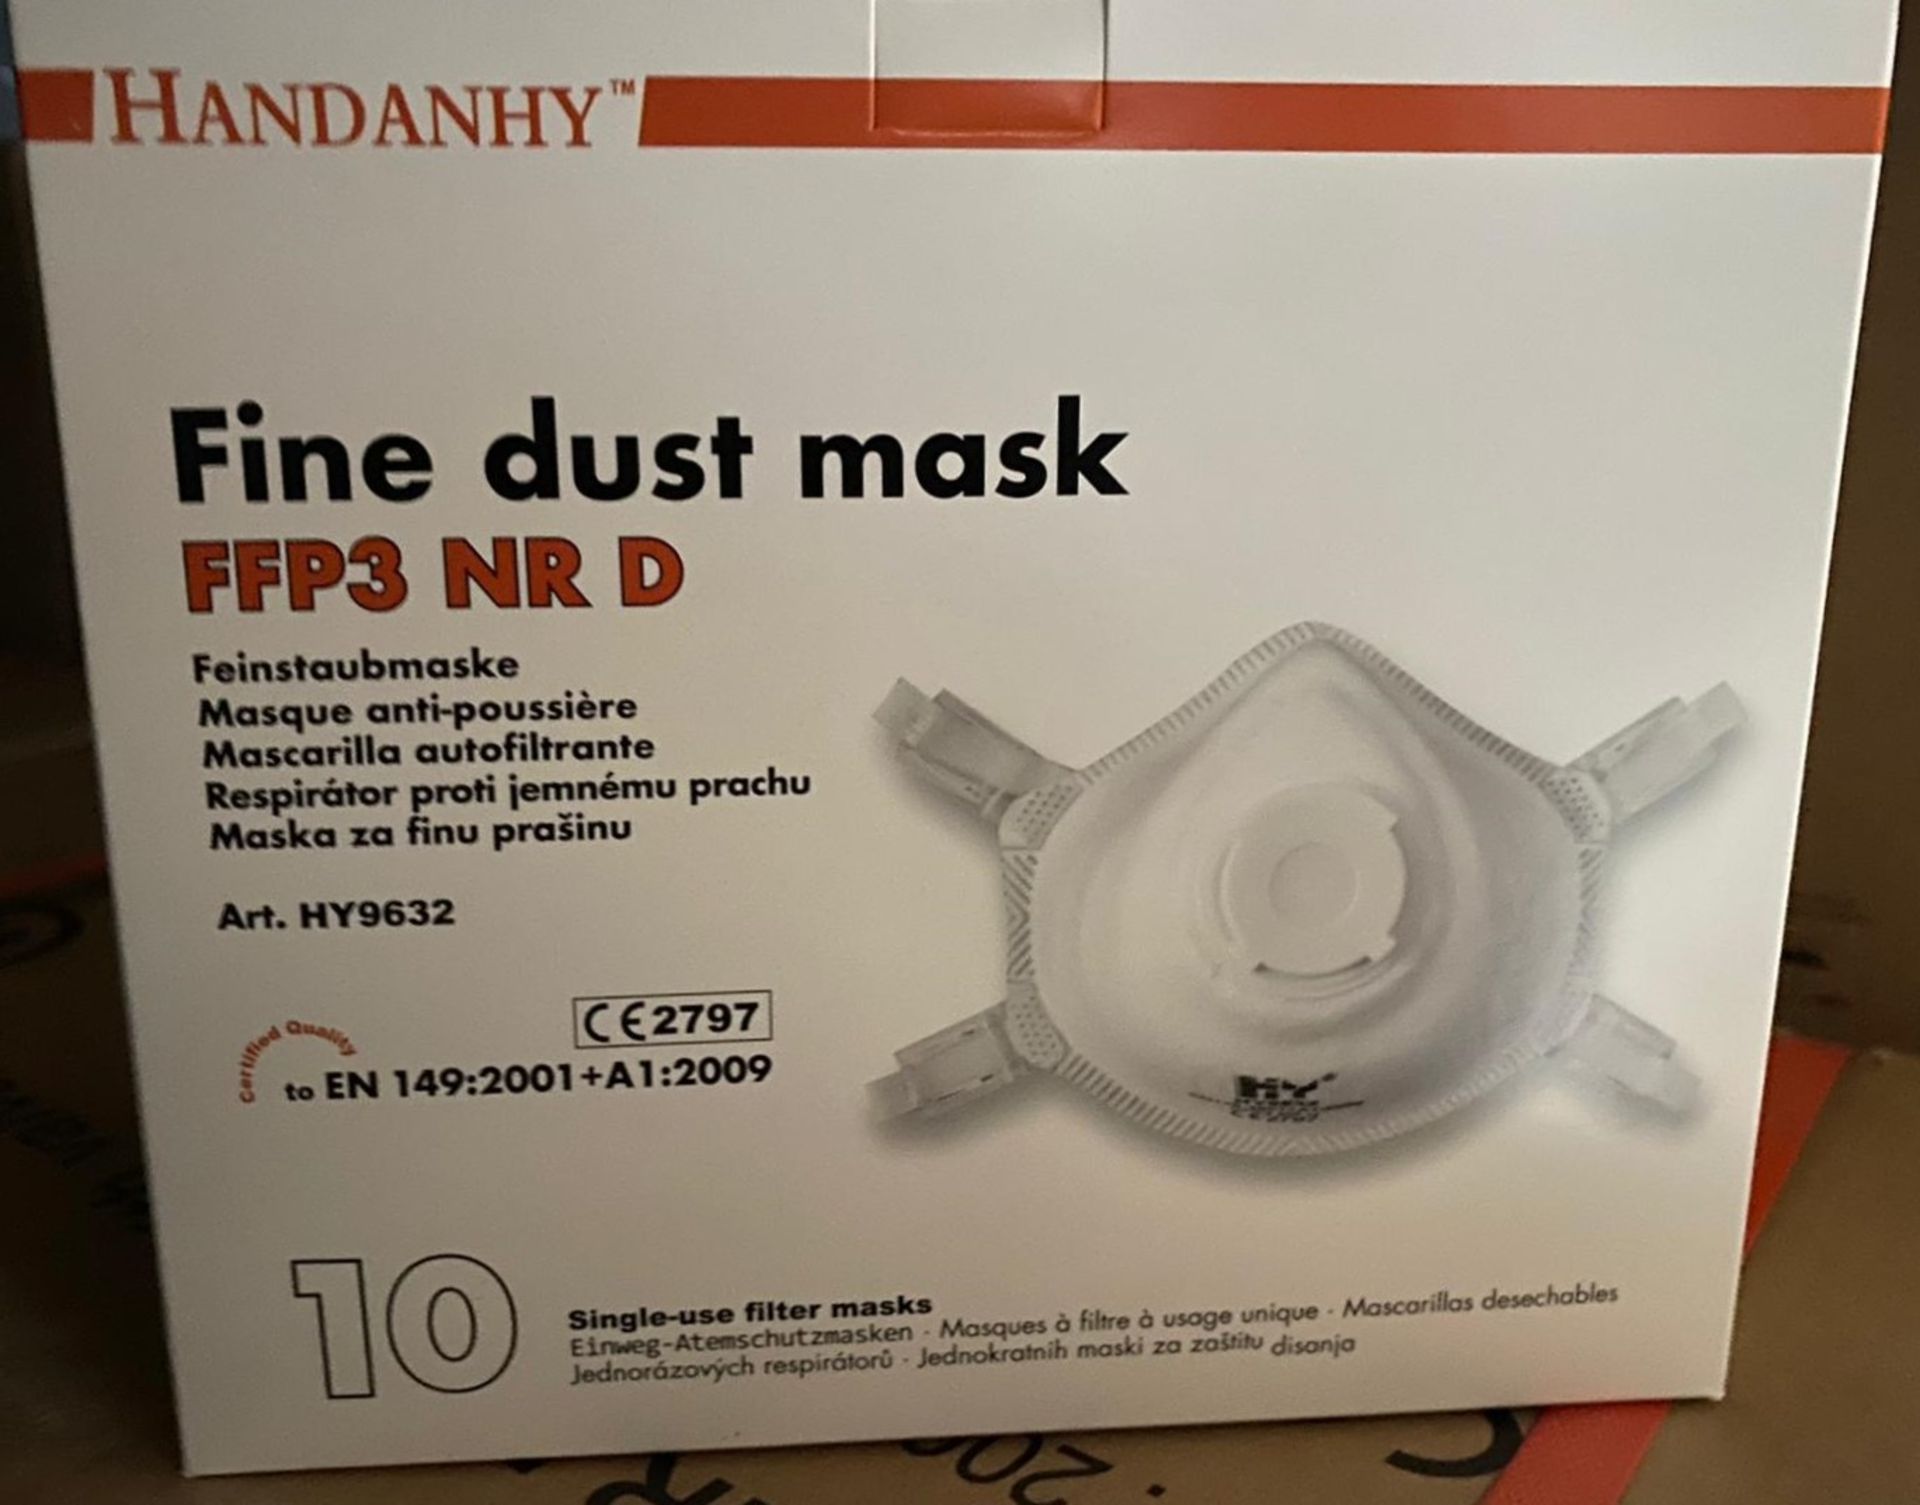 200 x Handanhy Fold Flat Disposable Face Masks With Exhalation Valves - Type HY8232 FFP3 - PPE - Image 5 of 5